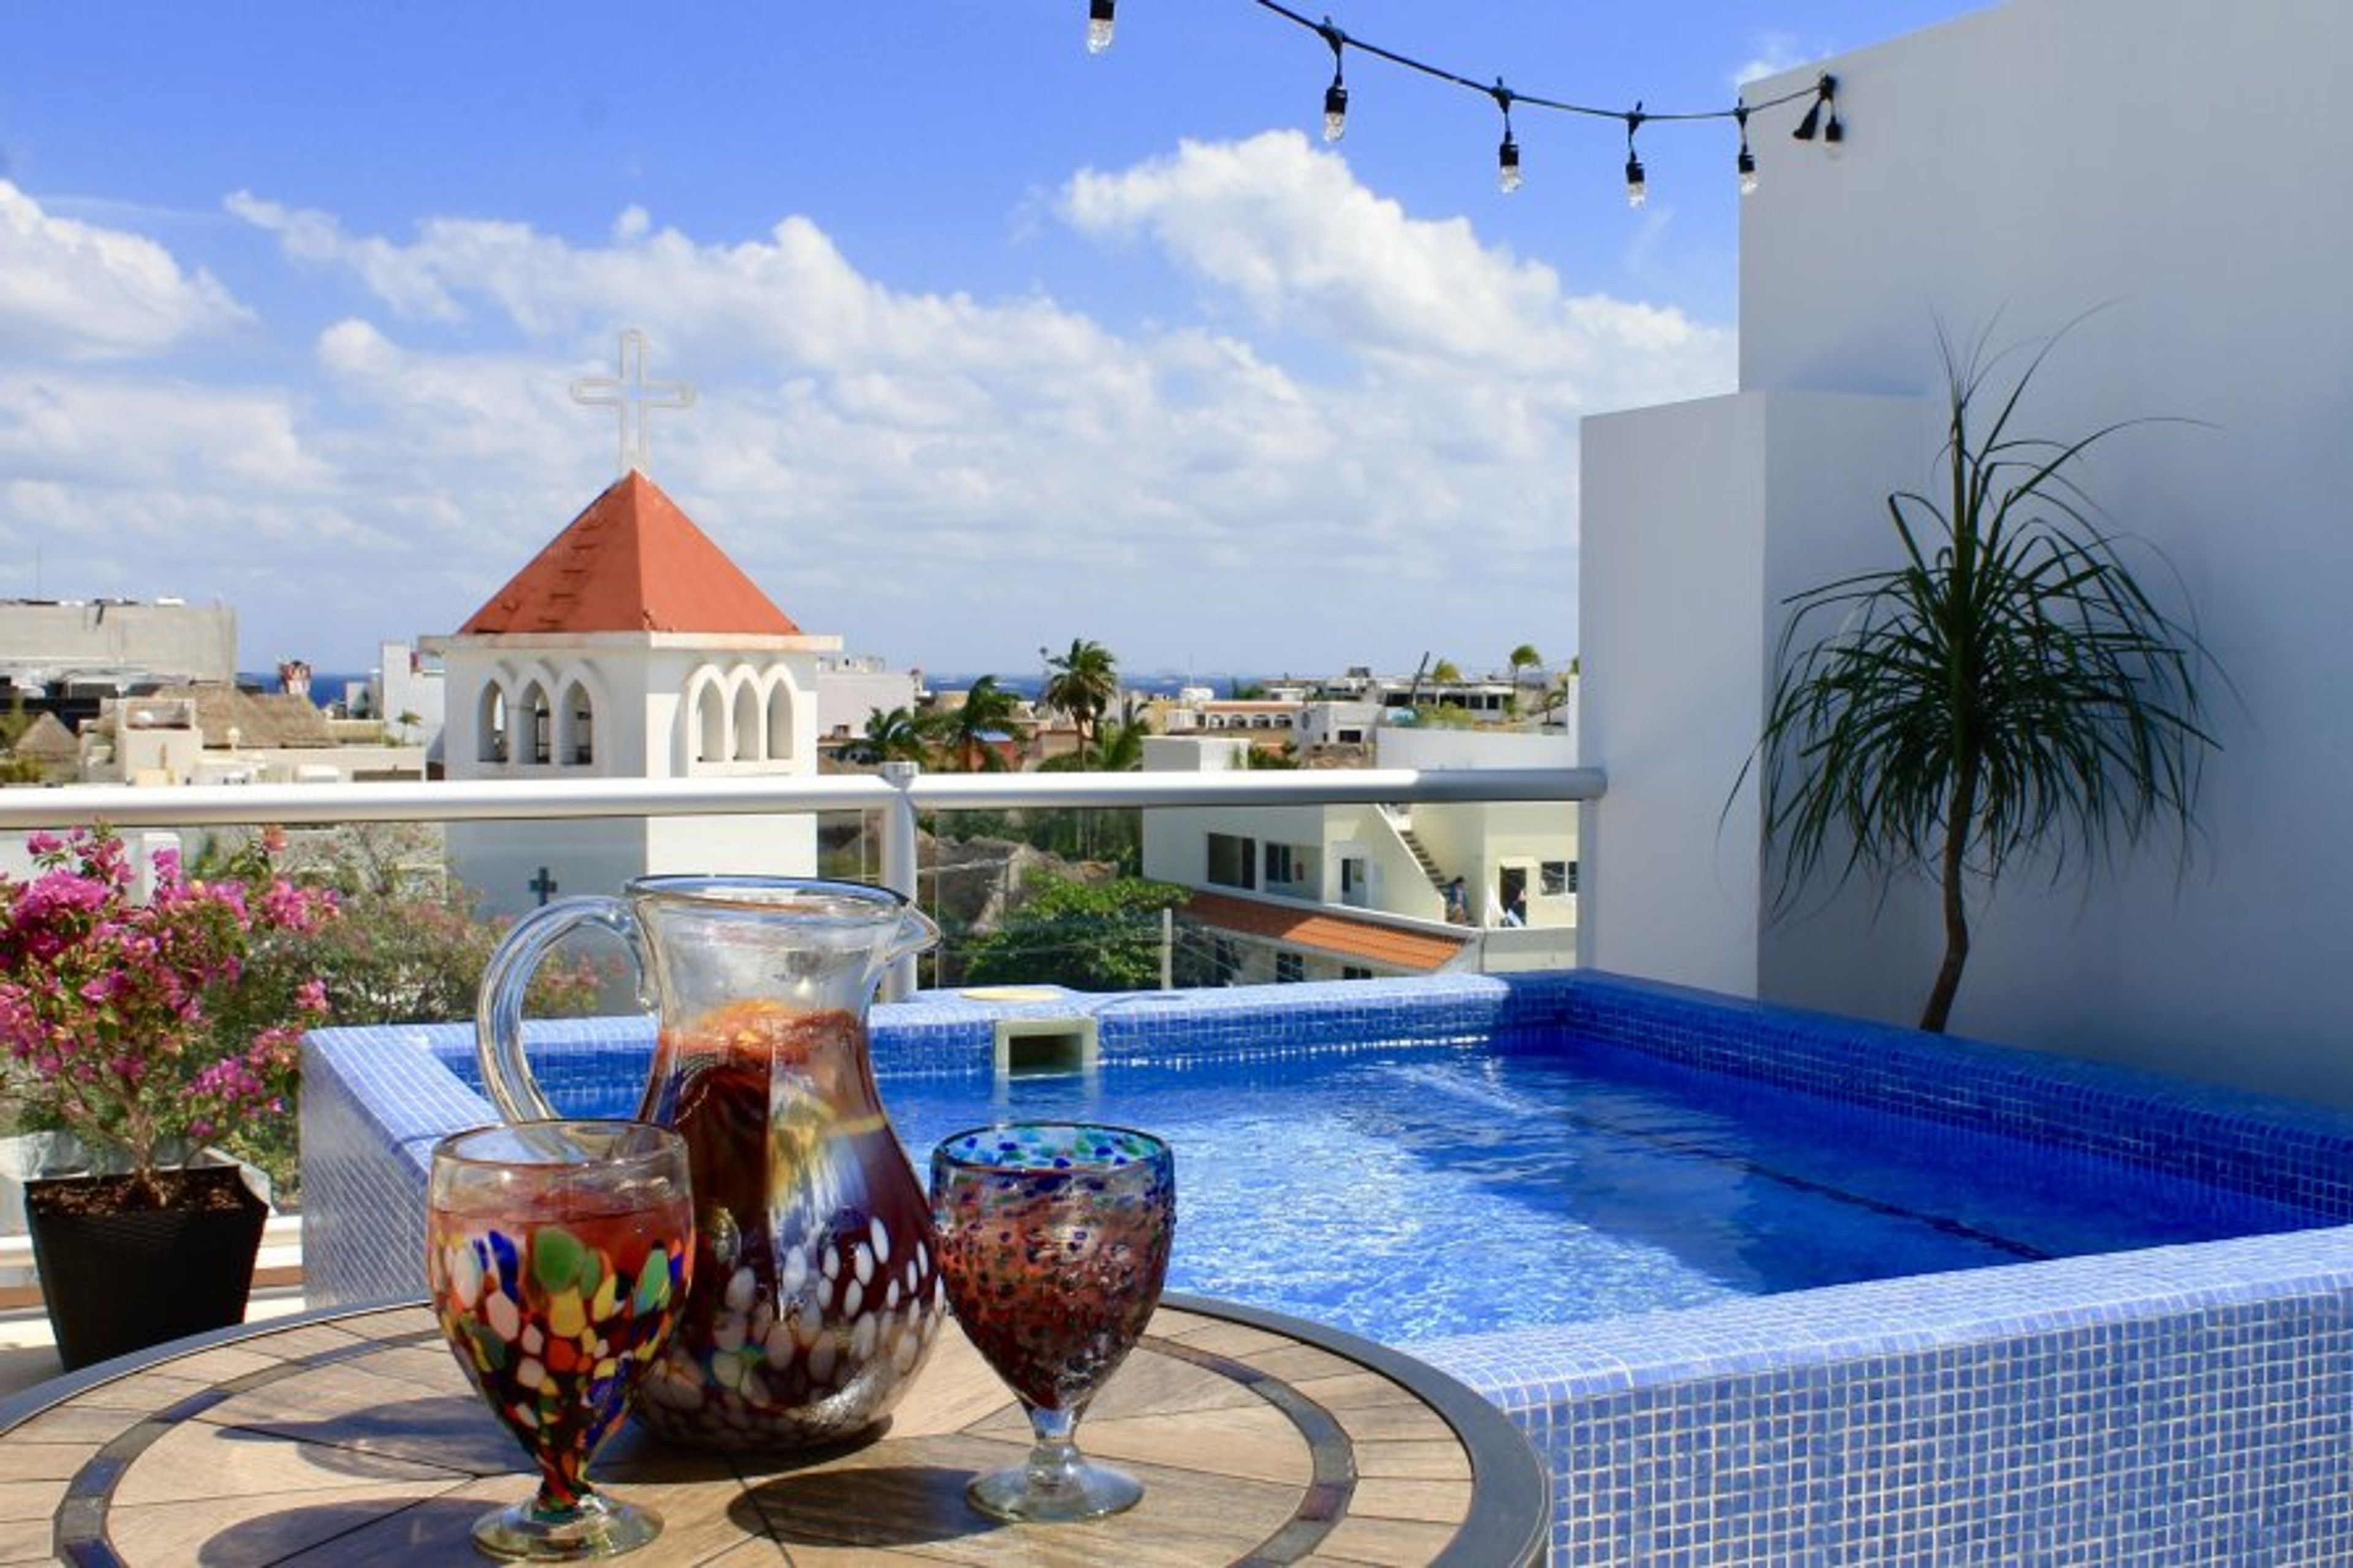 ENJOY A SANGRIA FROM WHILE ENJOYING THE OCEAN BREEZE ON THE ROOFTOP